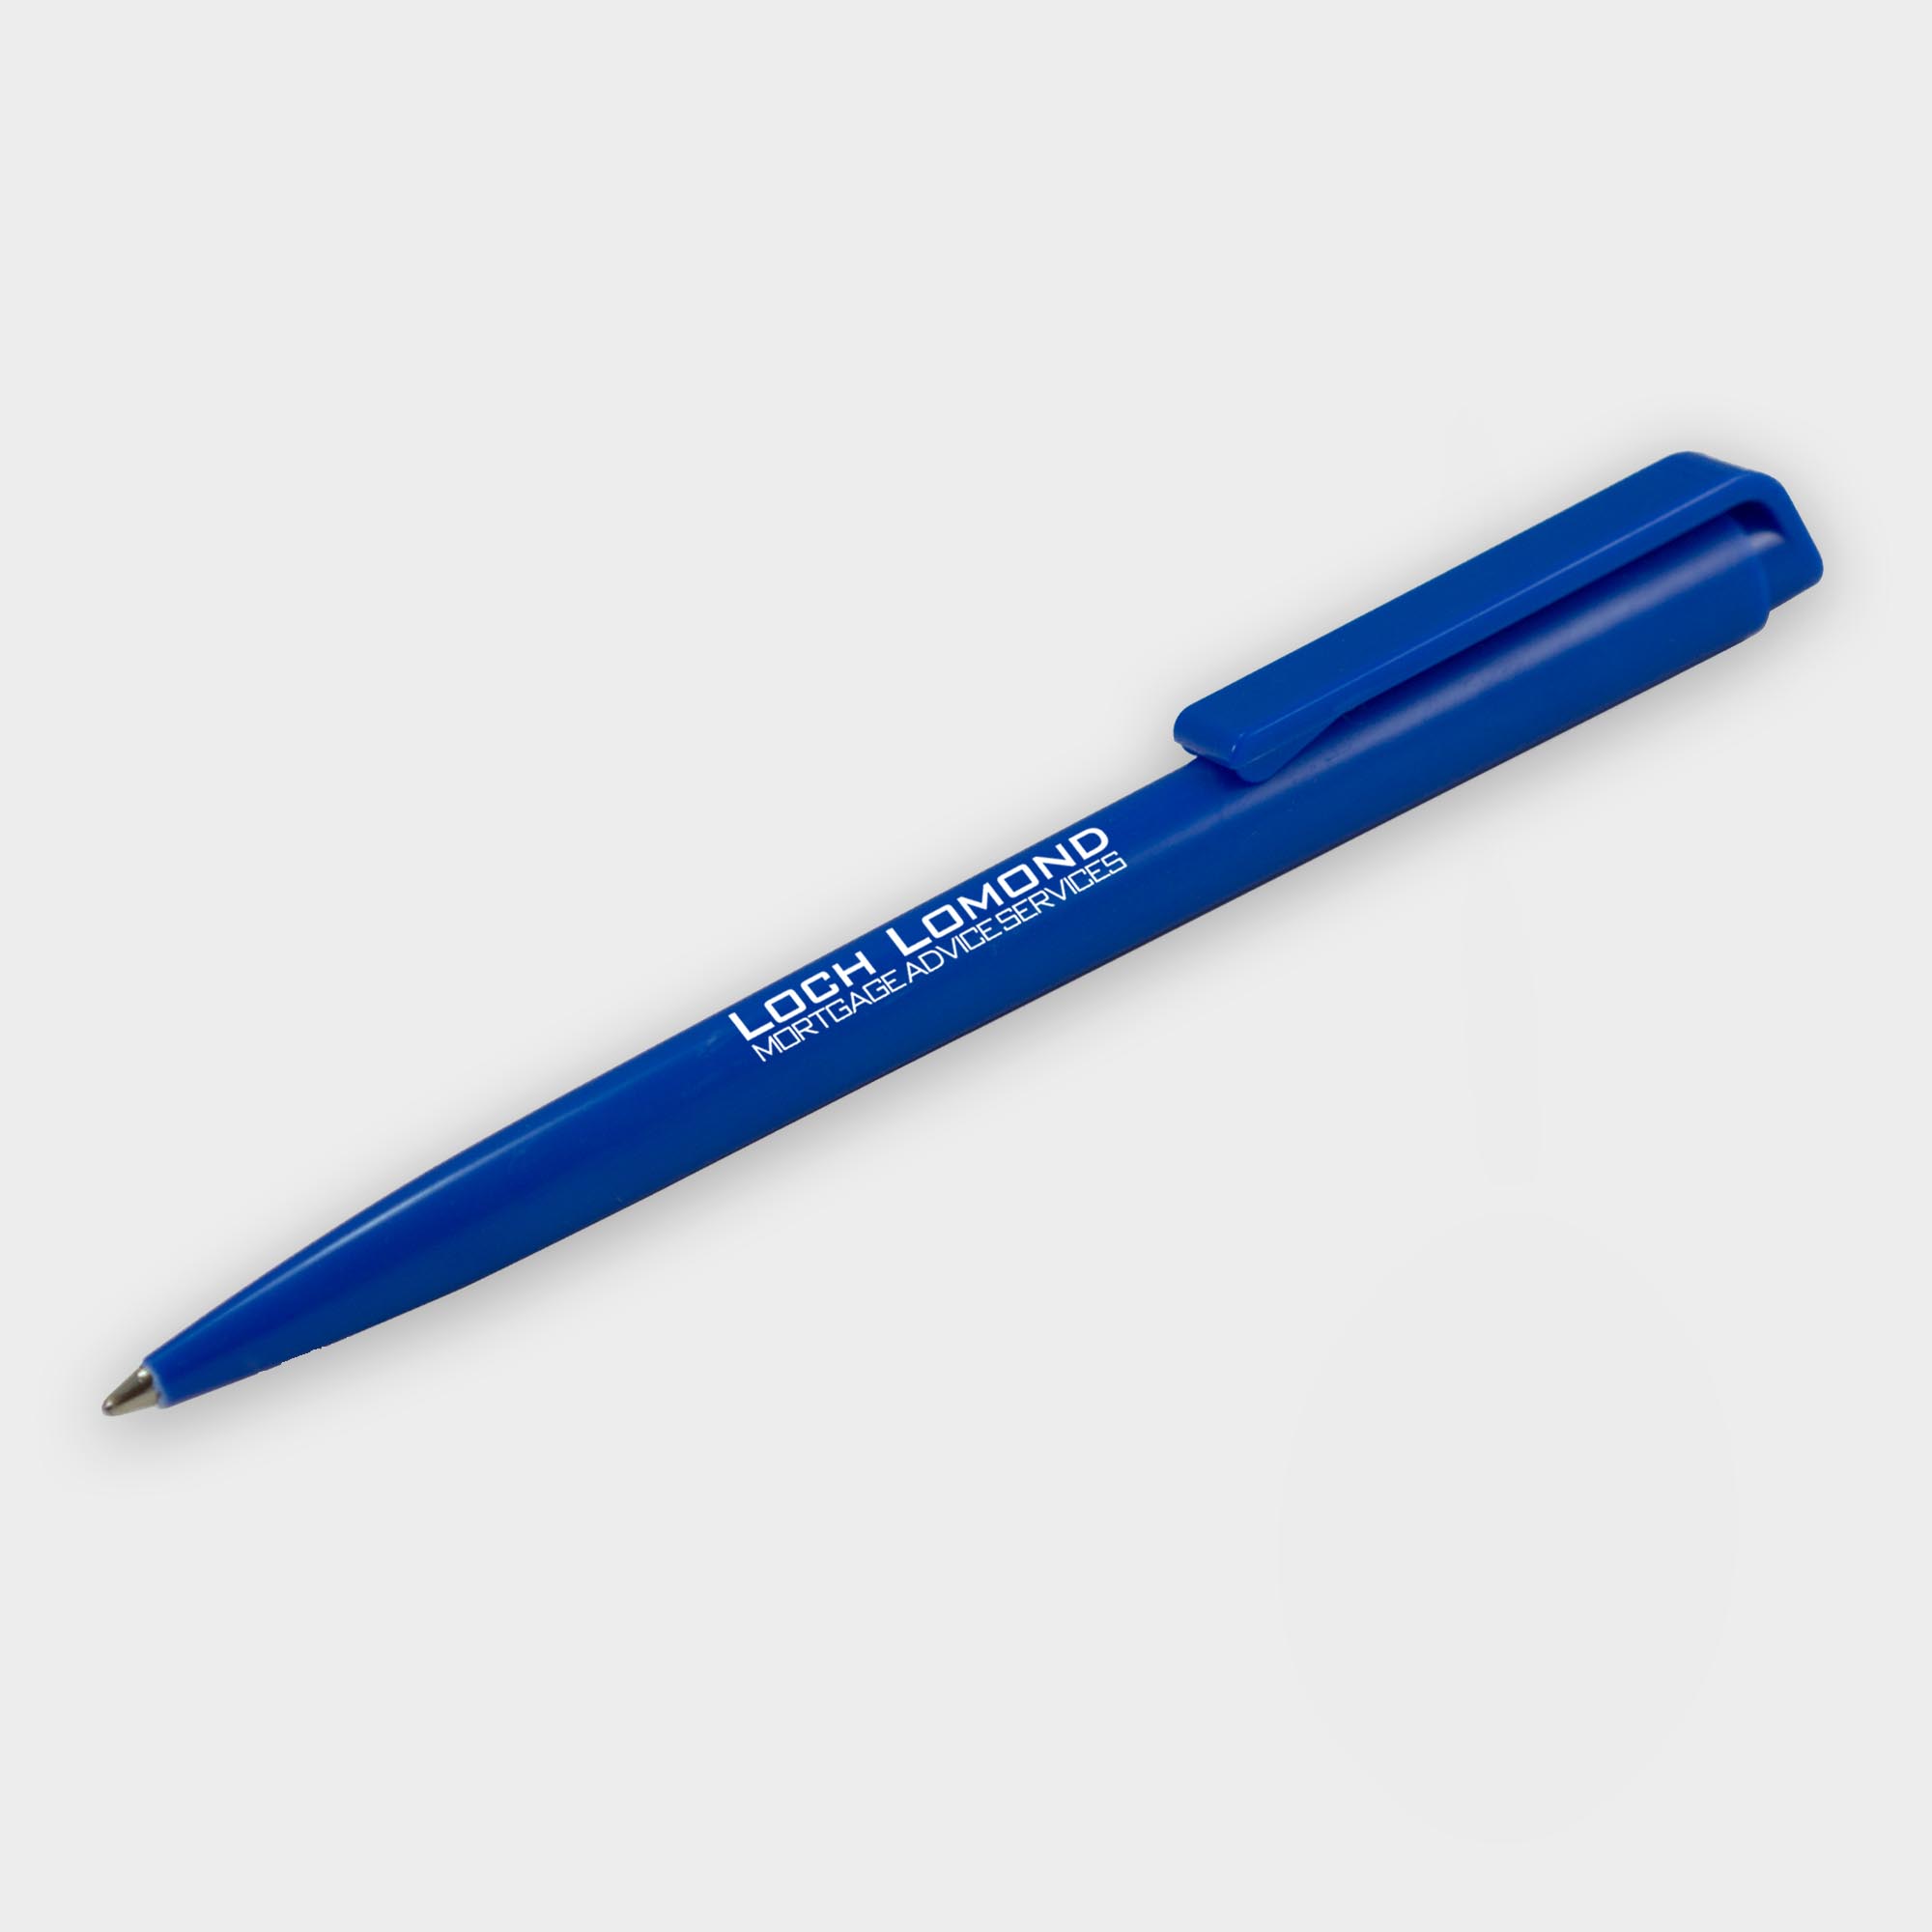 The Green & Good Sky Pen made from recycled CD cases. Twist action retractable pen, available in a variety of colours. Budget option for the price-conscious customer. Black ink as standard. Blue